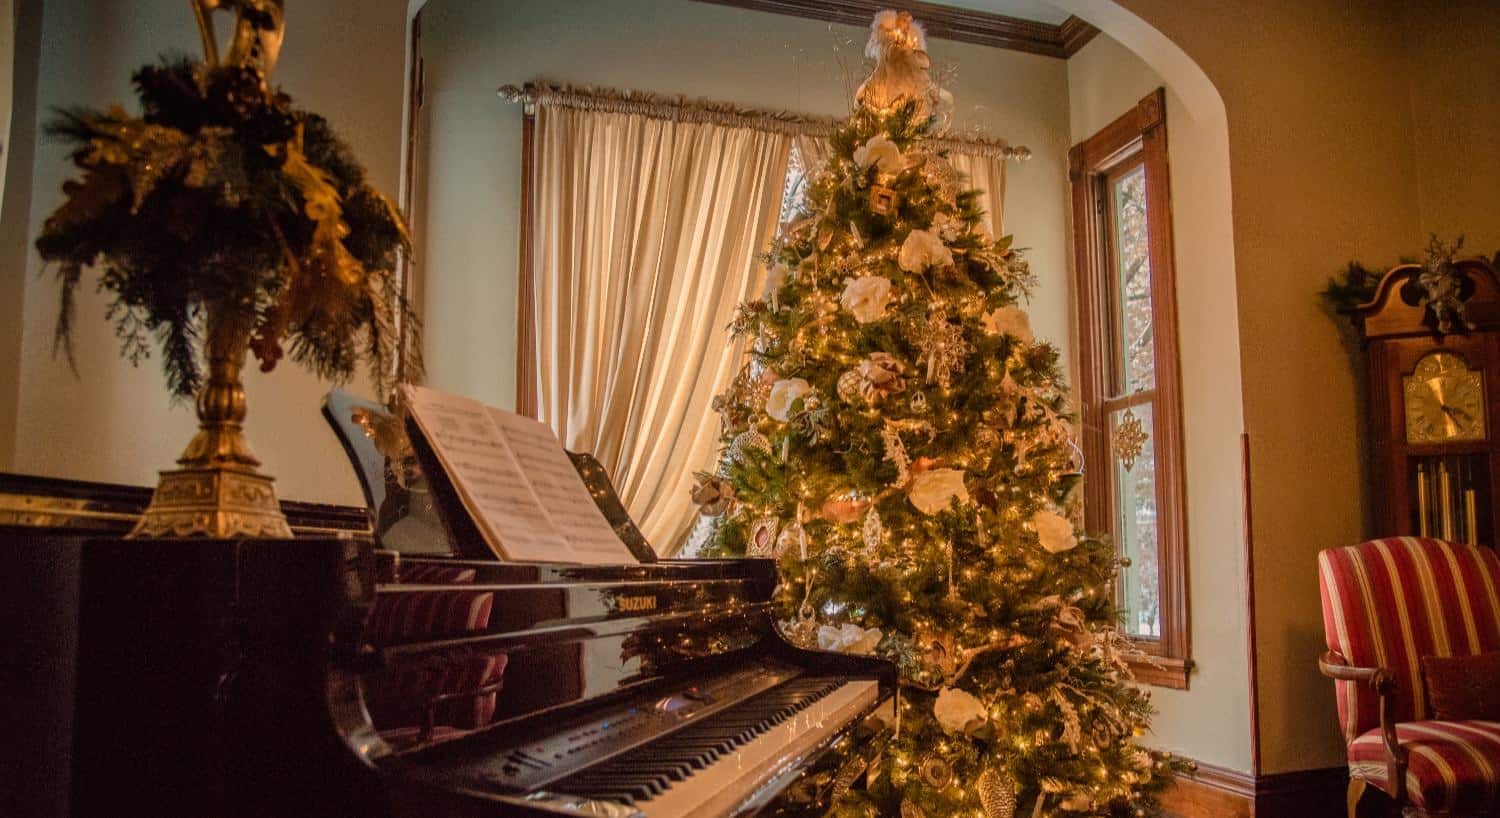 Close up view of piano with decorated Christmas tree in the background